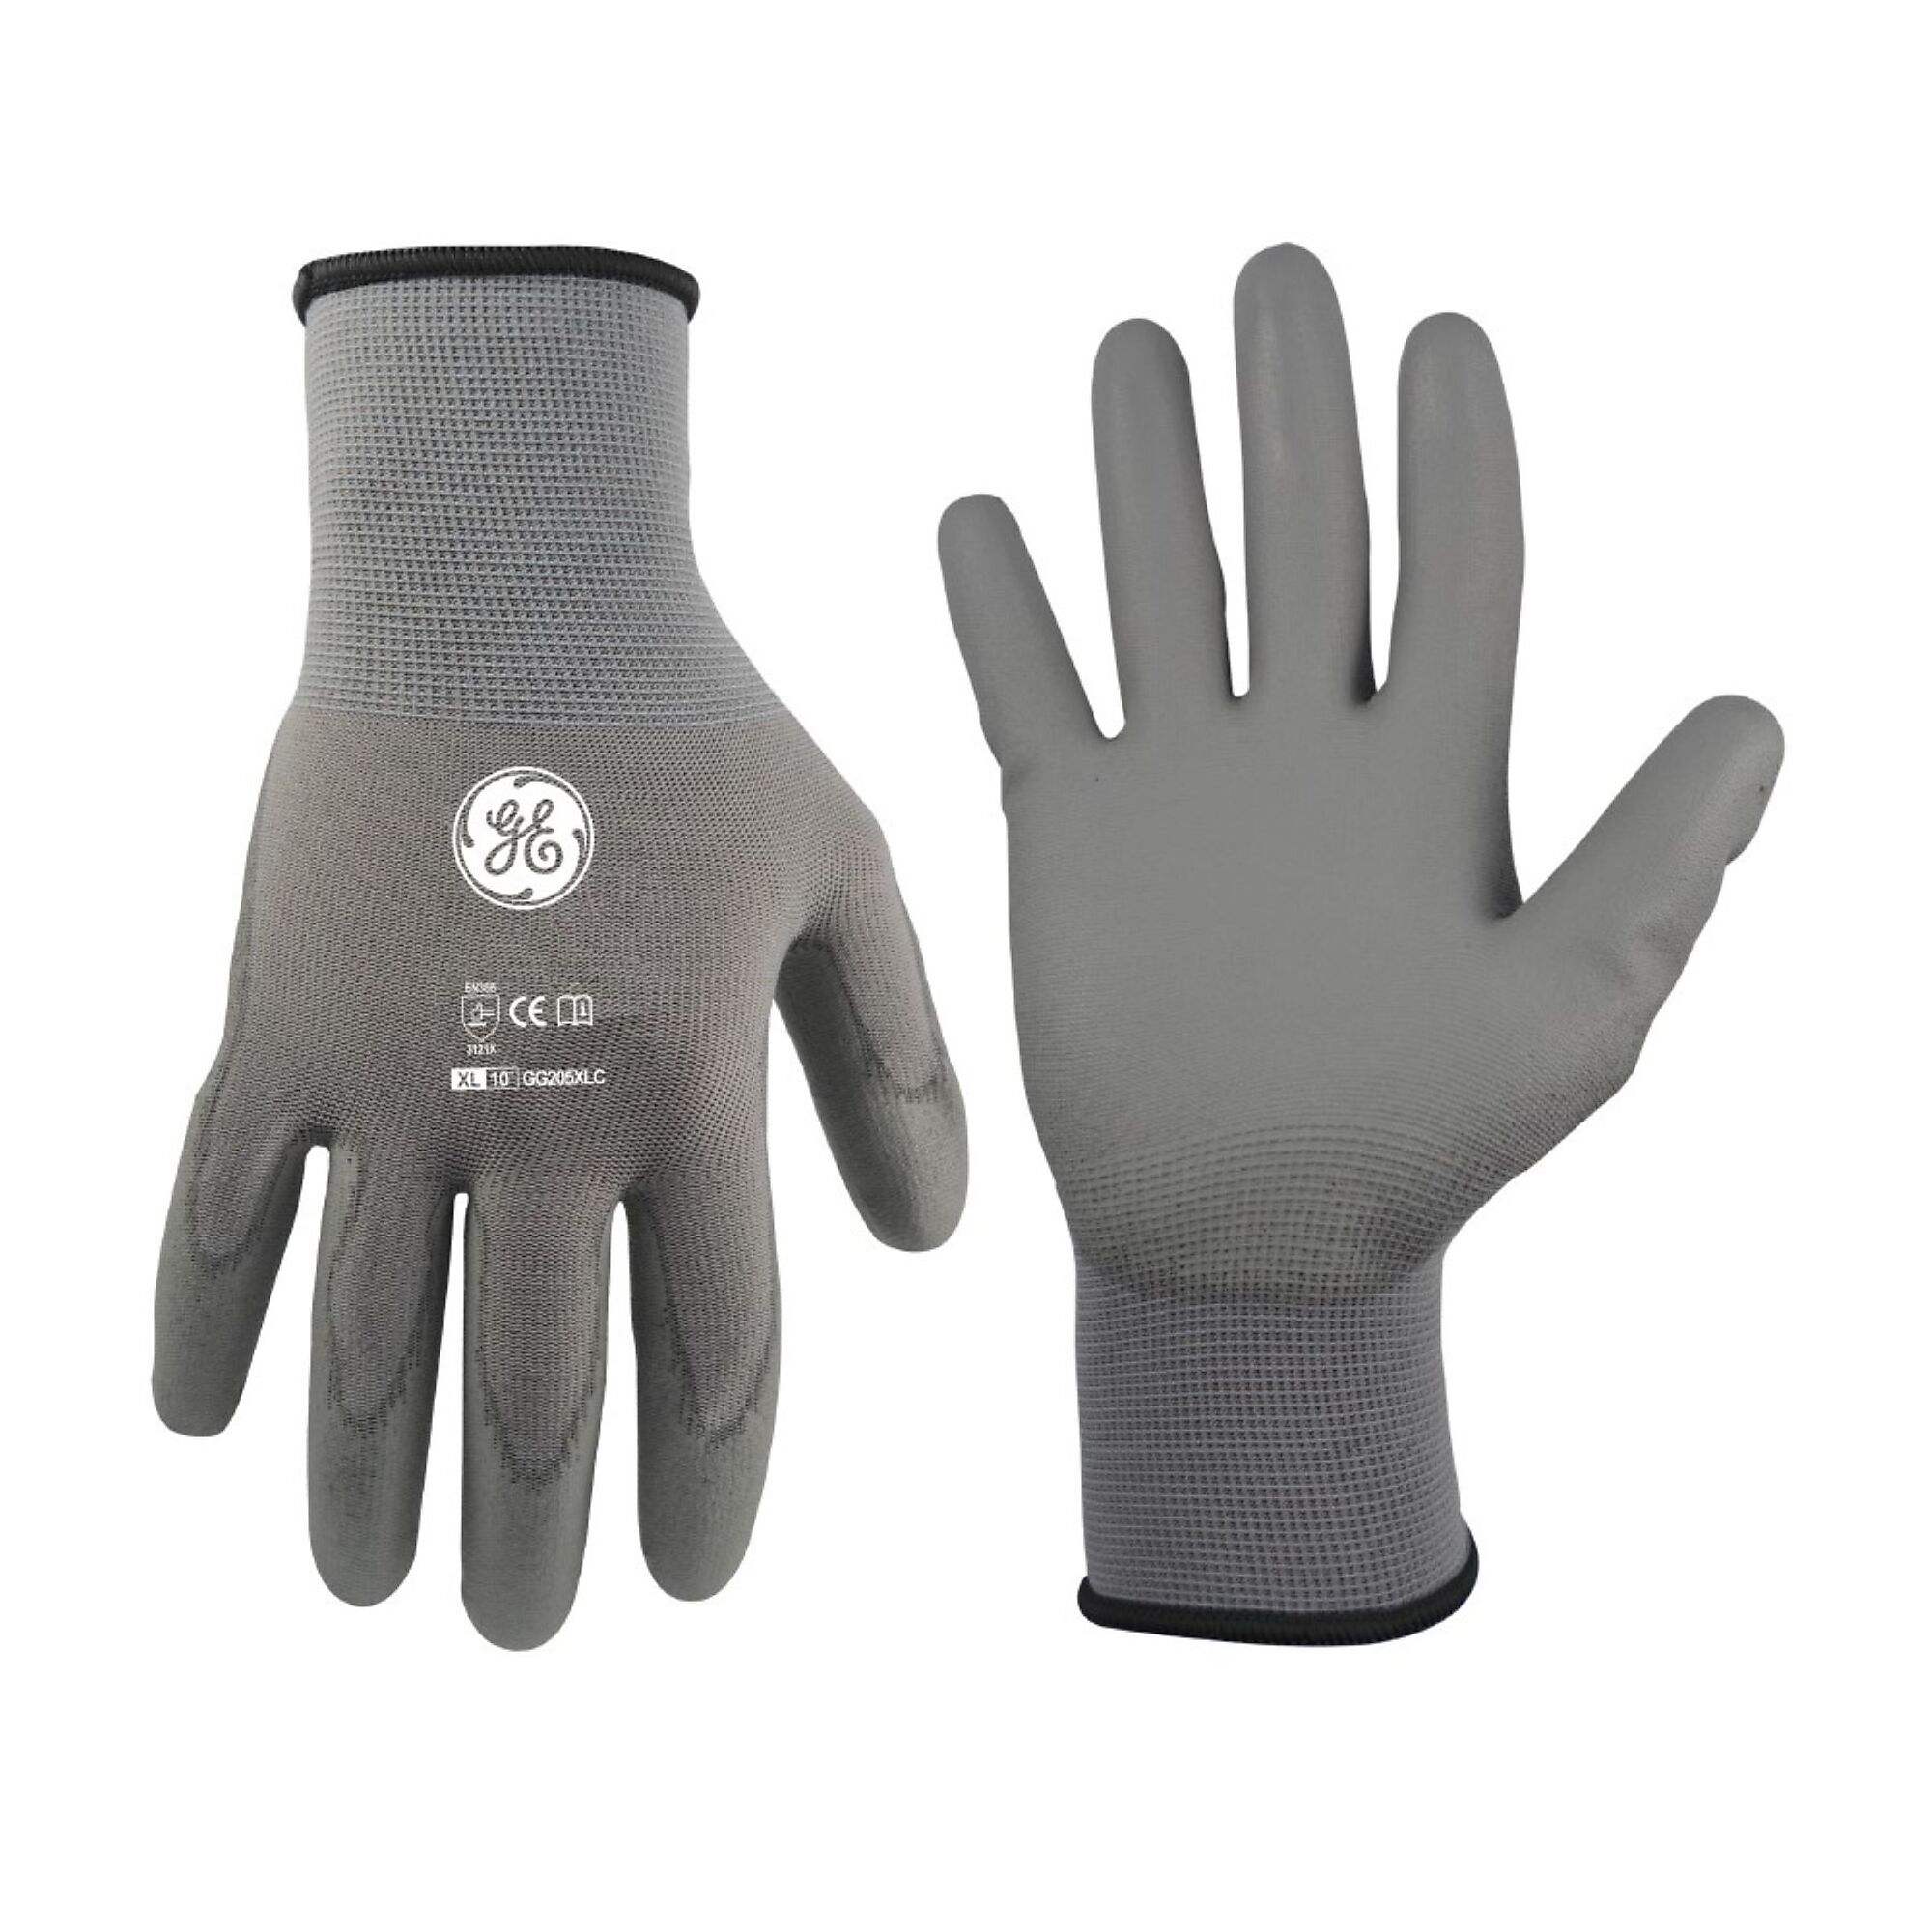 General Electric, Unisex Dipped Gloves Gray XL 12 pair, Size XL, Included (qty.) 12, Model GG205XL